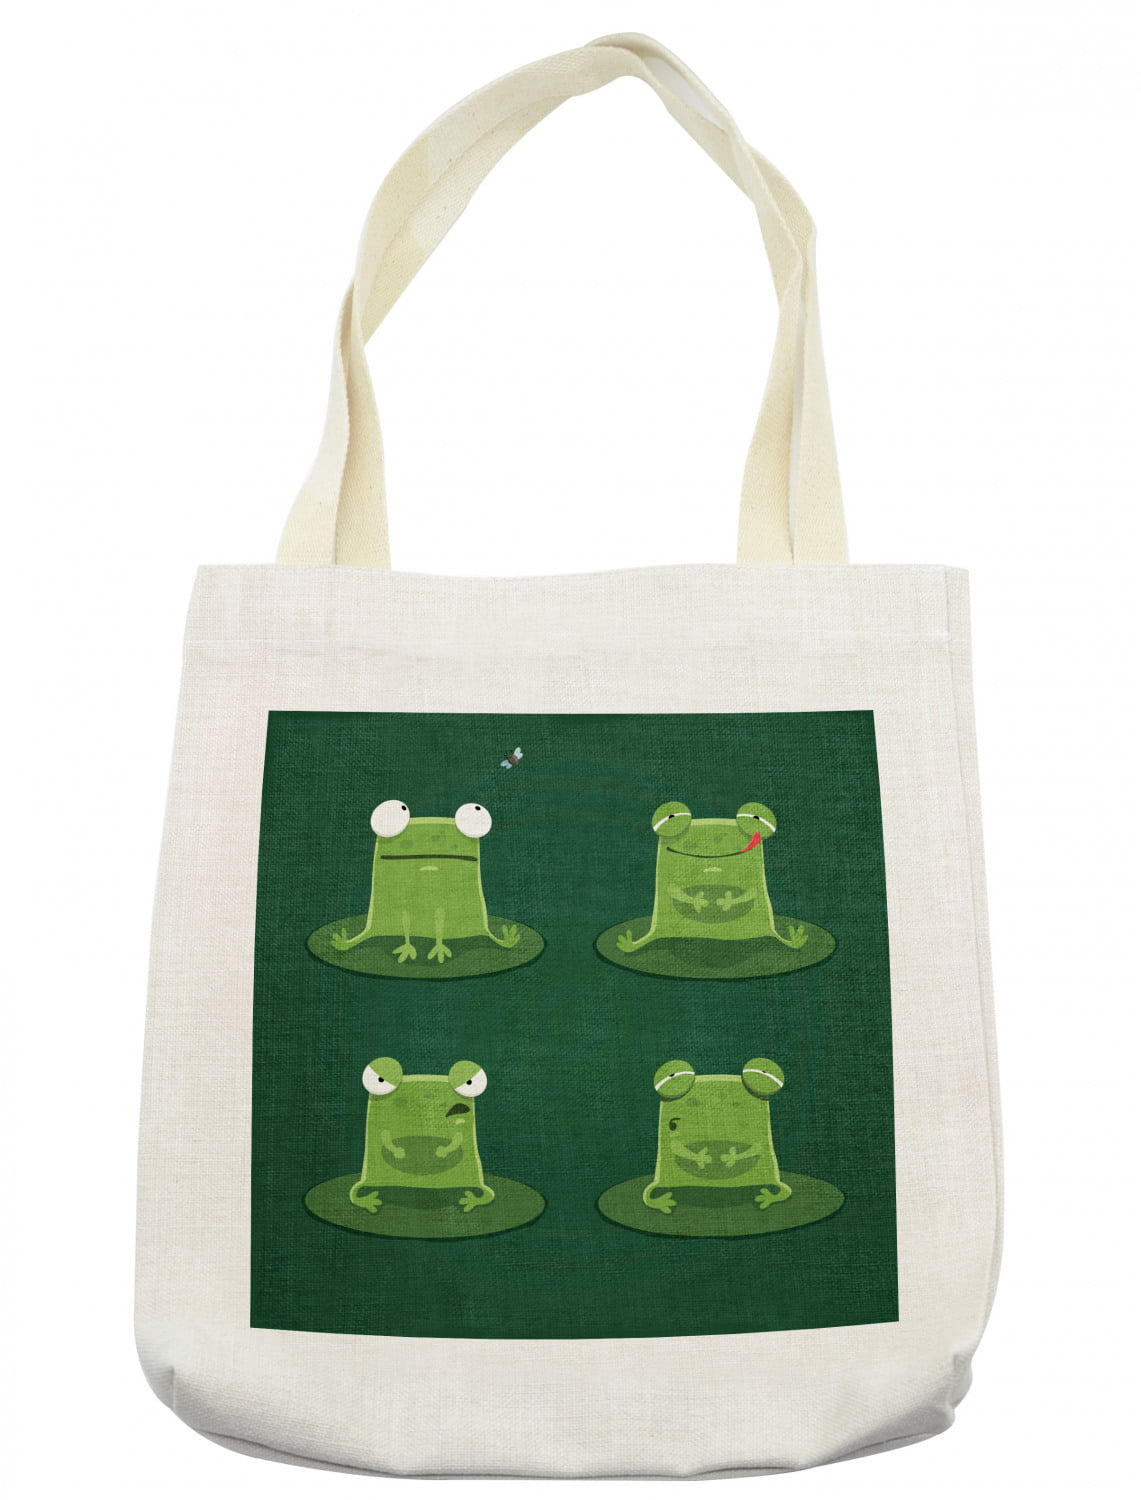 Natural Cotton Shoulder Tote Bag 100% Natural Cotton Fashion/Shopping/Beach/Everyday Bag Funky Frog 